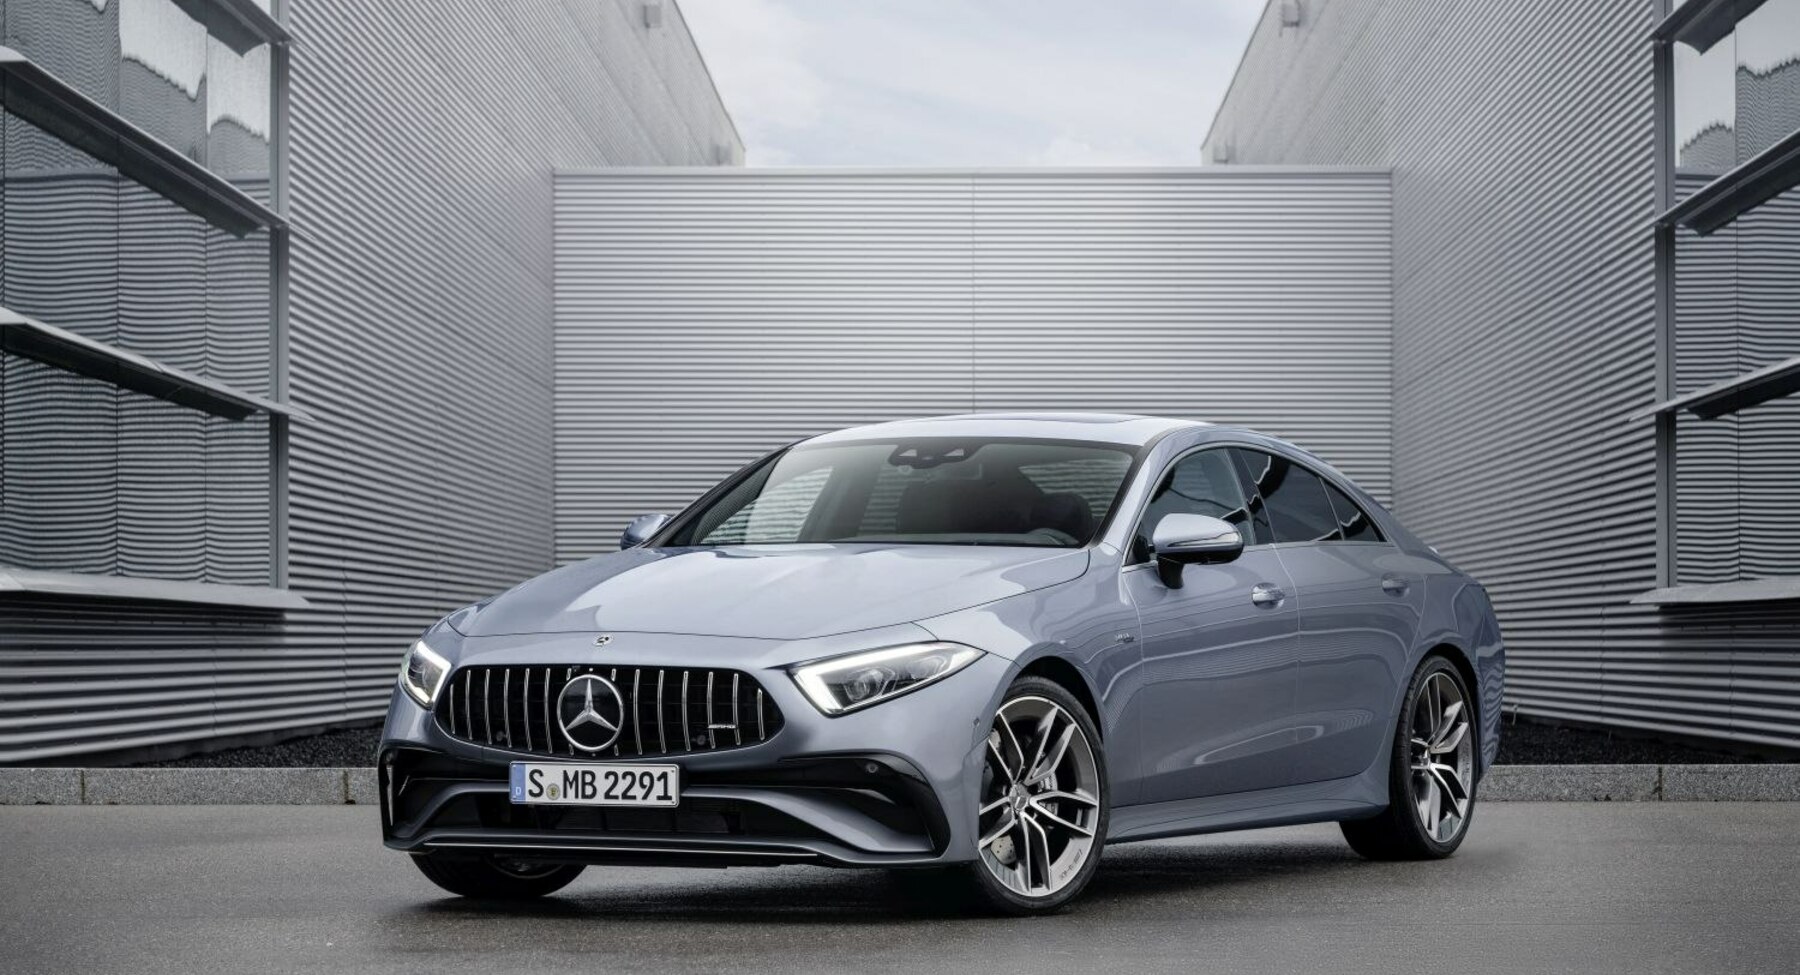 Mercedes-Benz CLS coupe (C257, facelift 2021) CLS 300d (265 Hp) MHEV 4MATIC 9G-TRONIC 2021, 2022